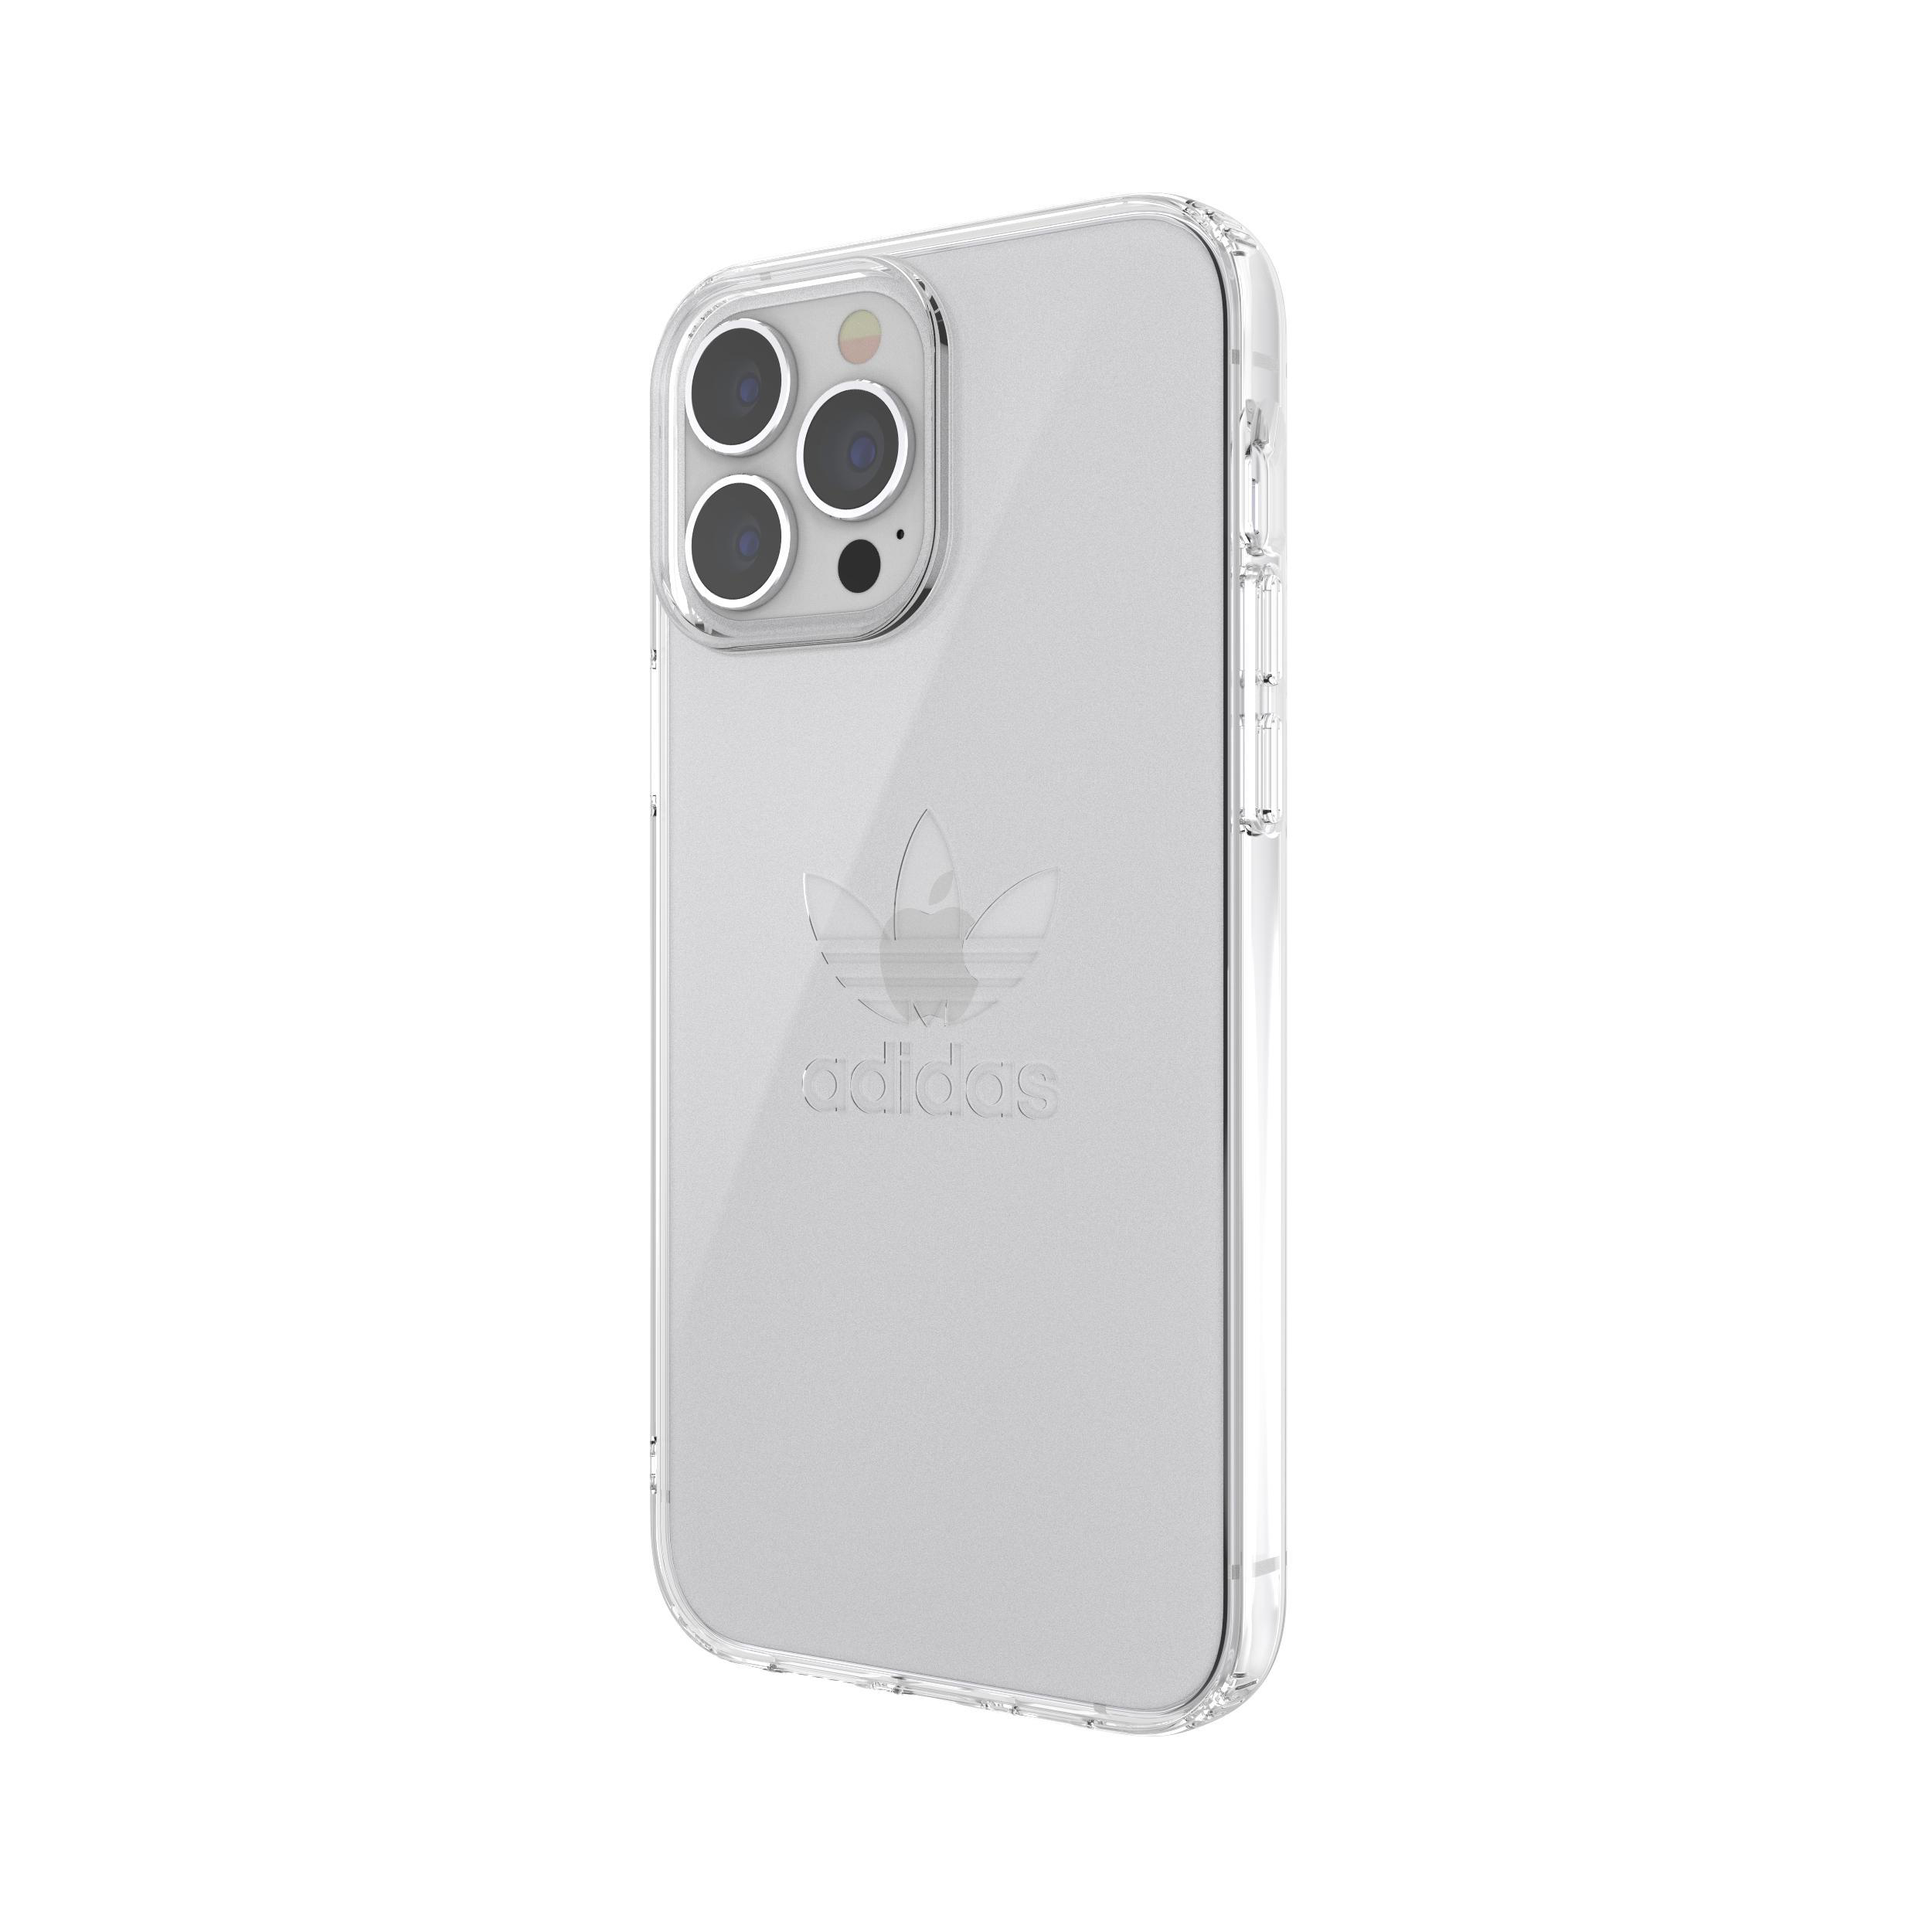 Apple, ORIGINALS Transparent Max, 13 Pro Backcover, Clear, iPhone ADIDAS Protective